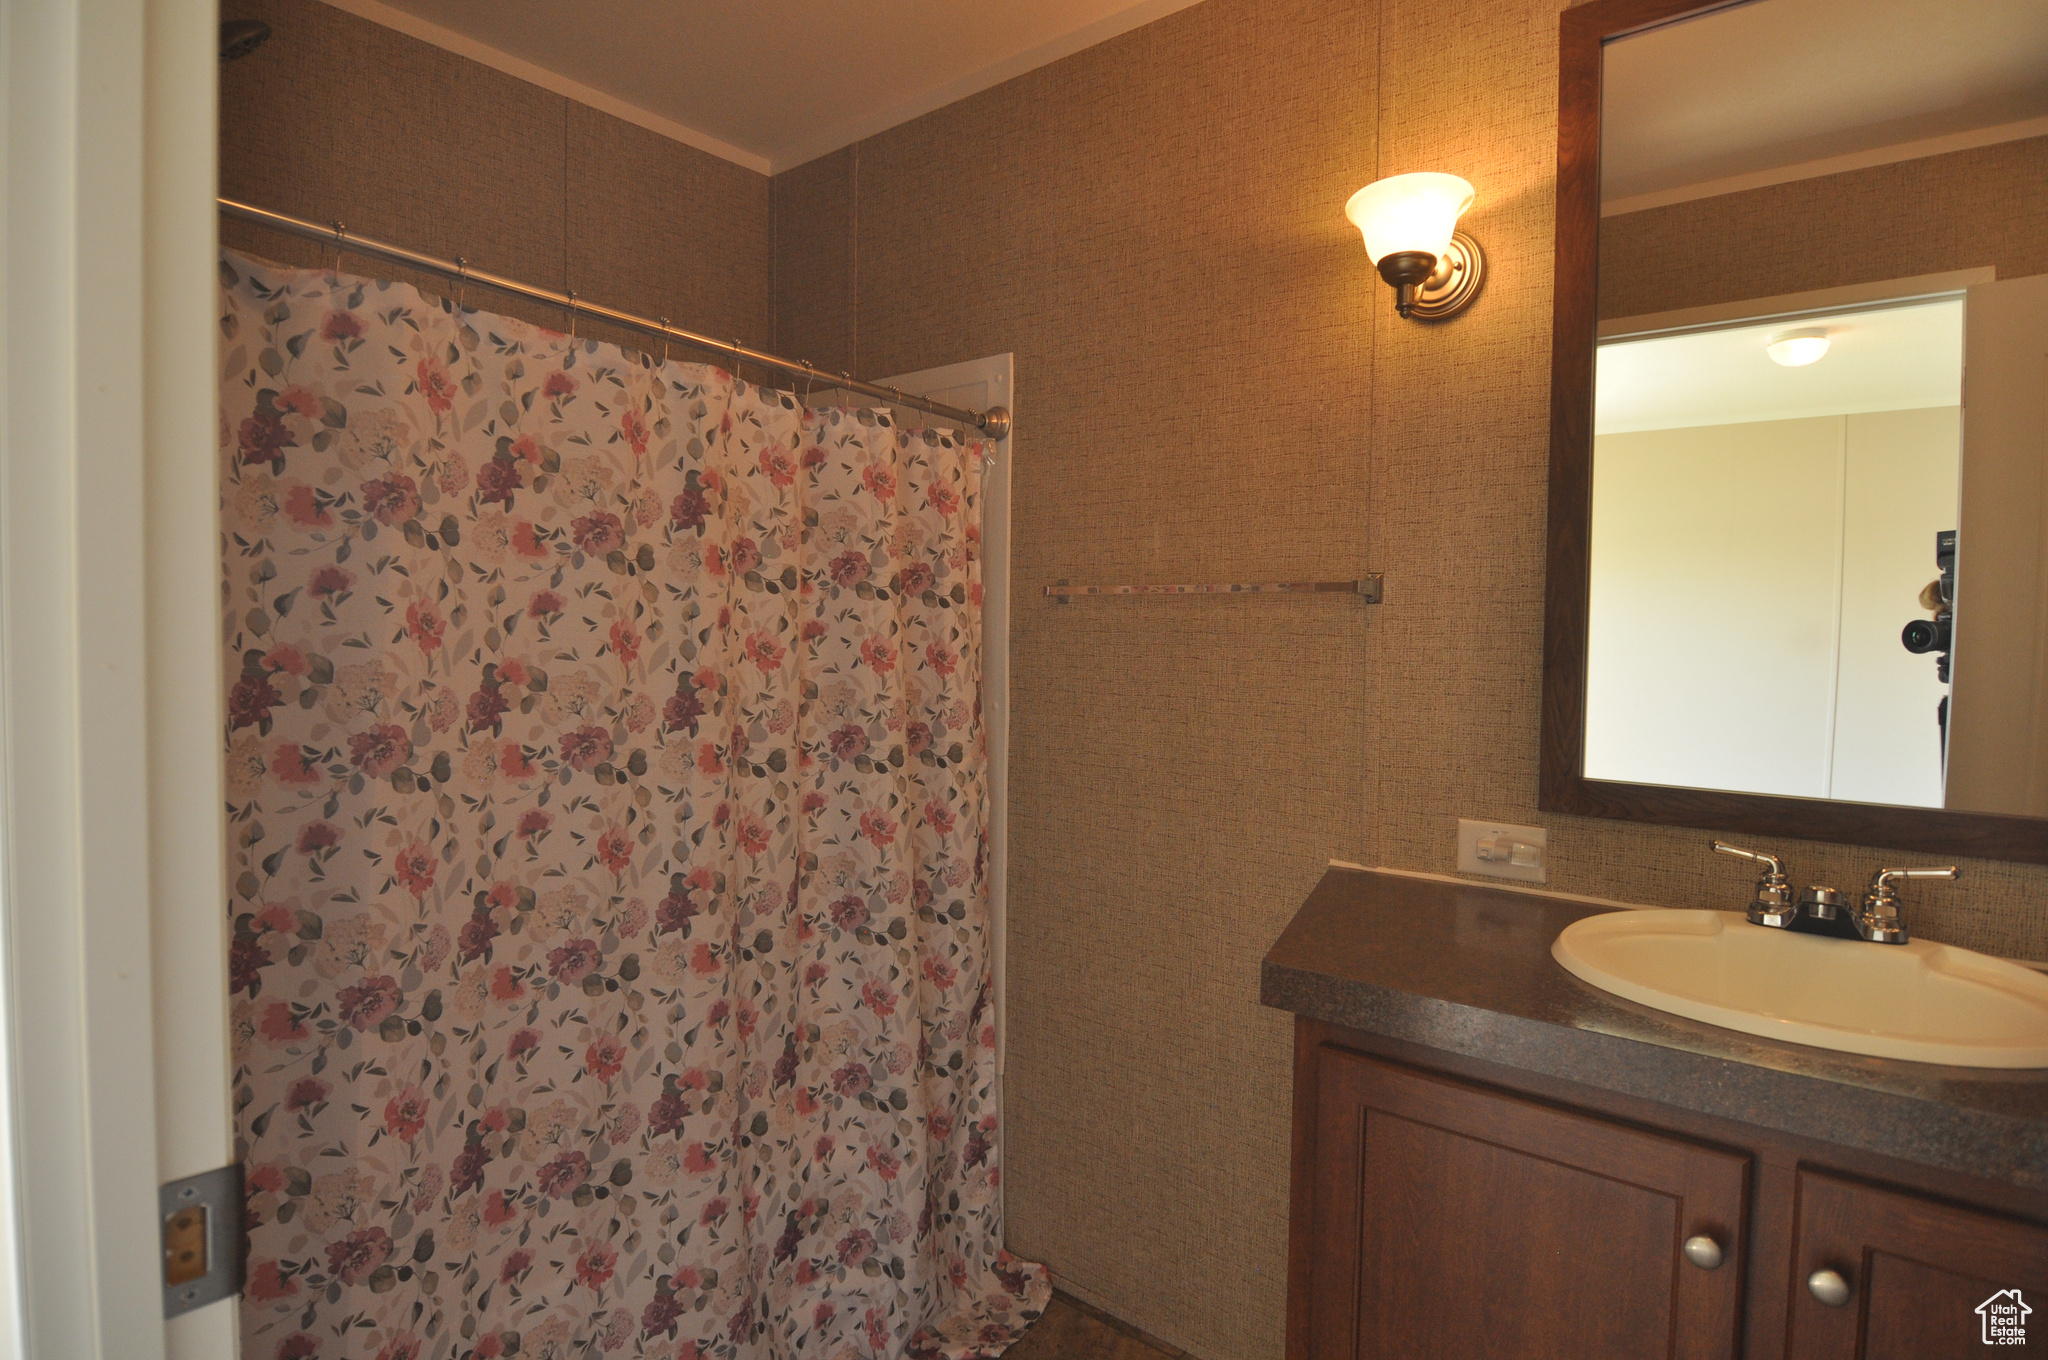 Bathroom with oversized vanity and crown molding